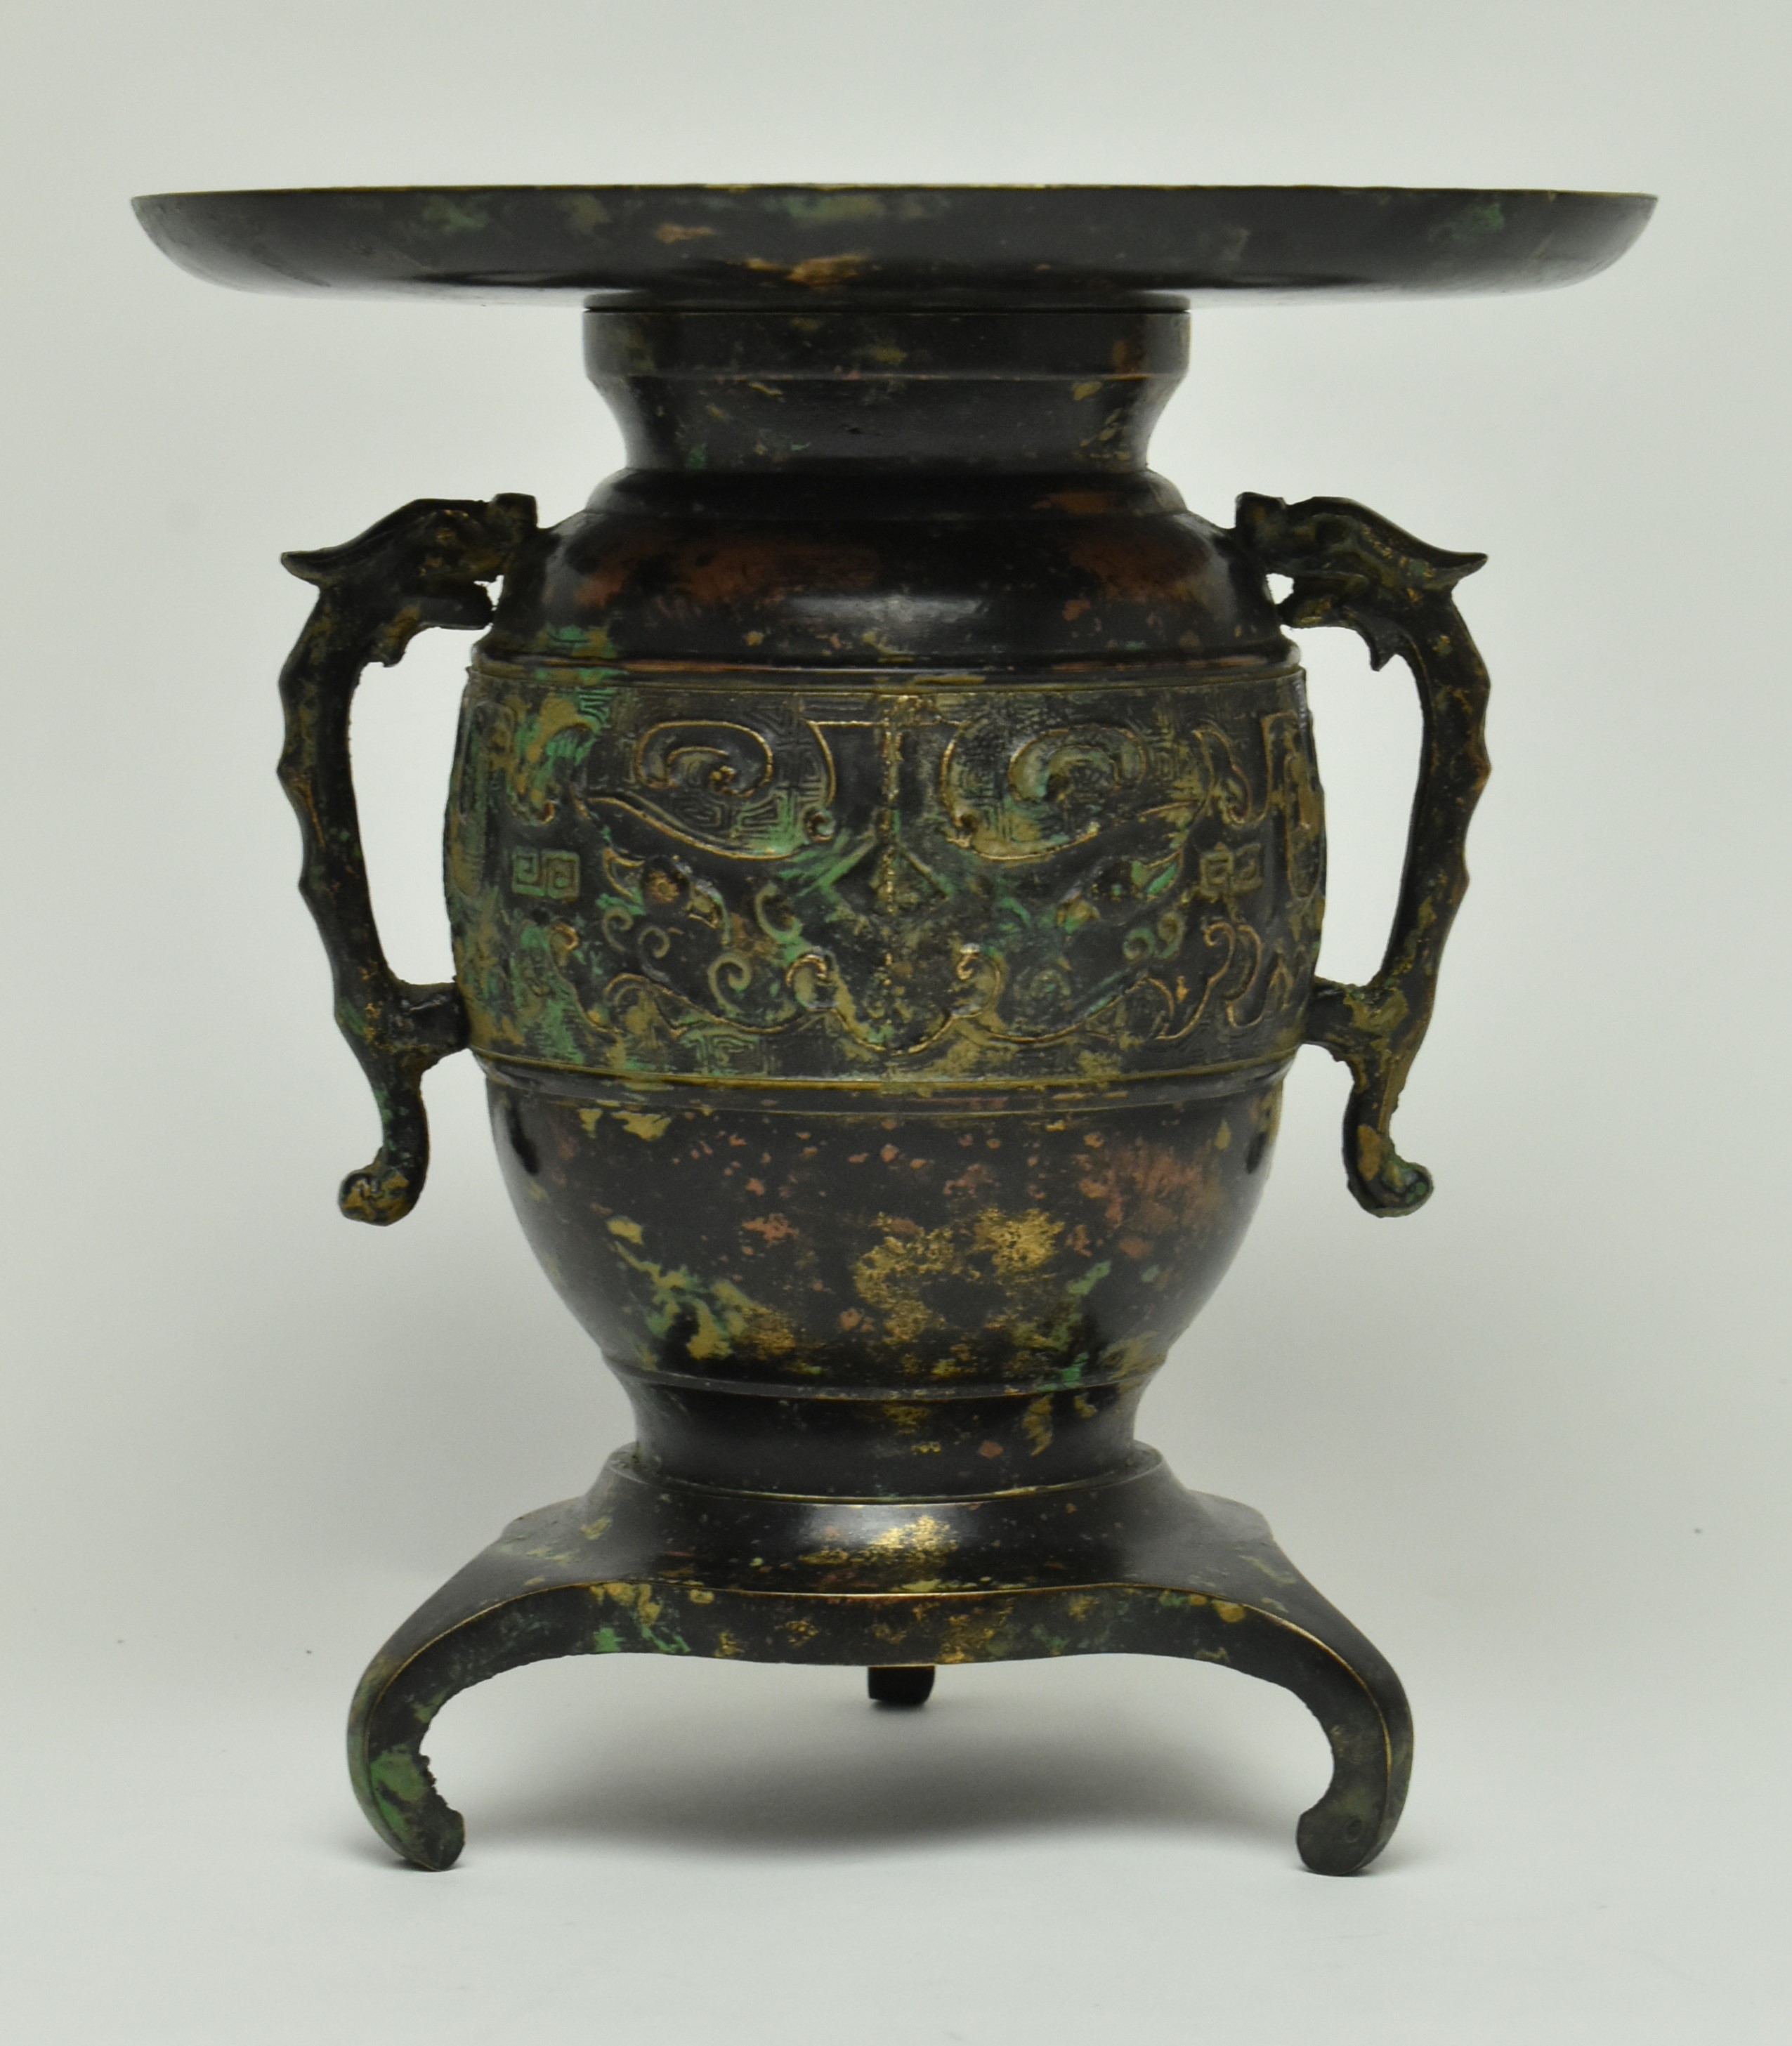 TWO JAPANESE BRONZE PIECES "DRAGON" CENSER AND PLANT POT - Image 7 of 12